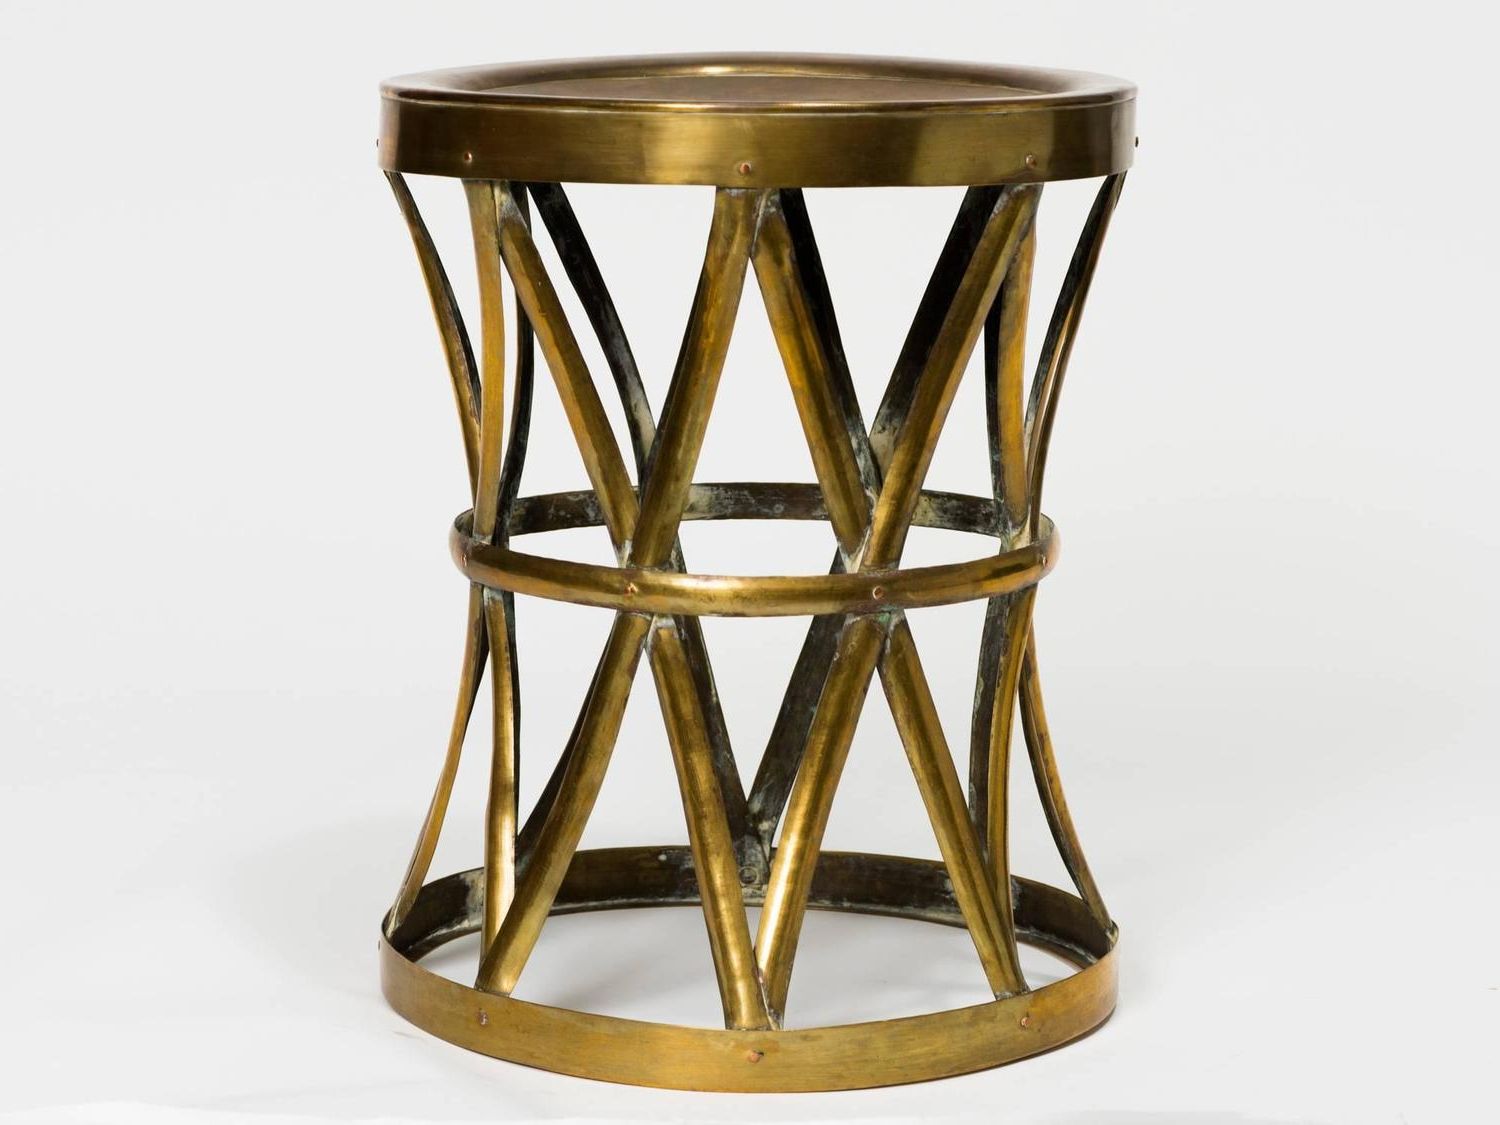 White Antique Brass Stools Regarding Well Known Vintage Brass Drum Stool/table For Sale At 1stdibs (View 2 of 10)